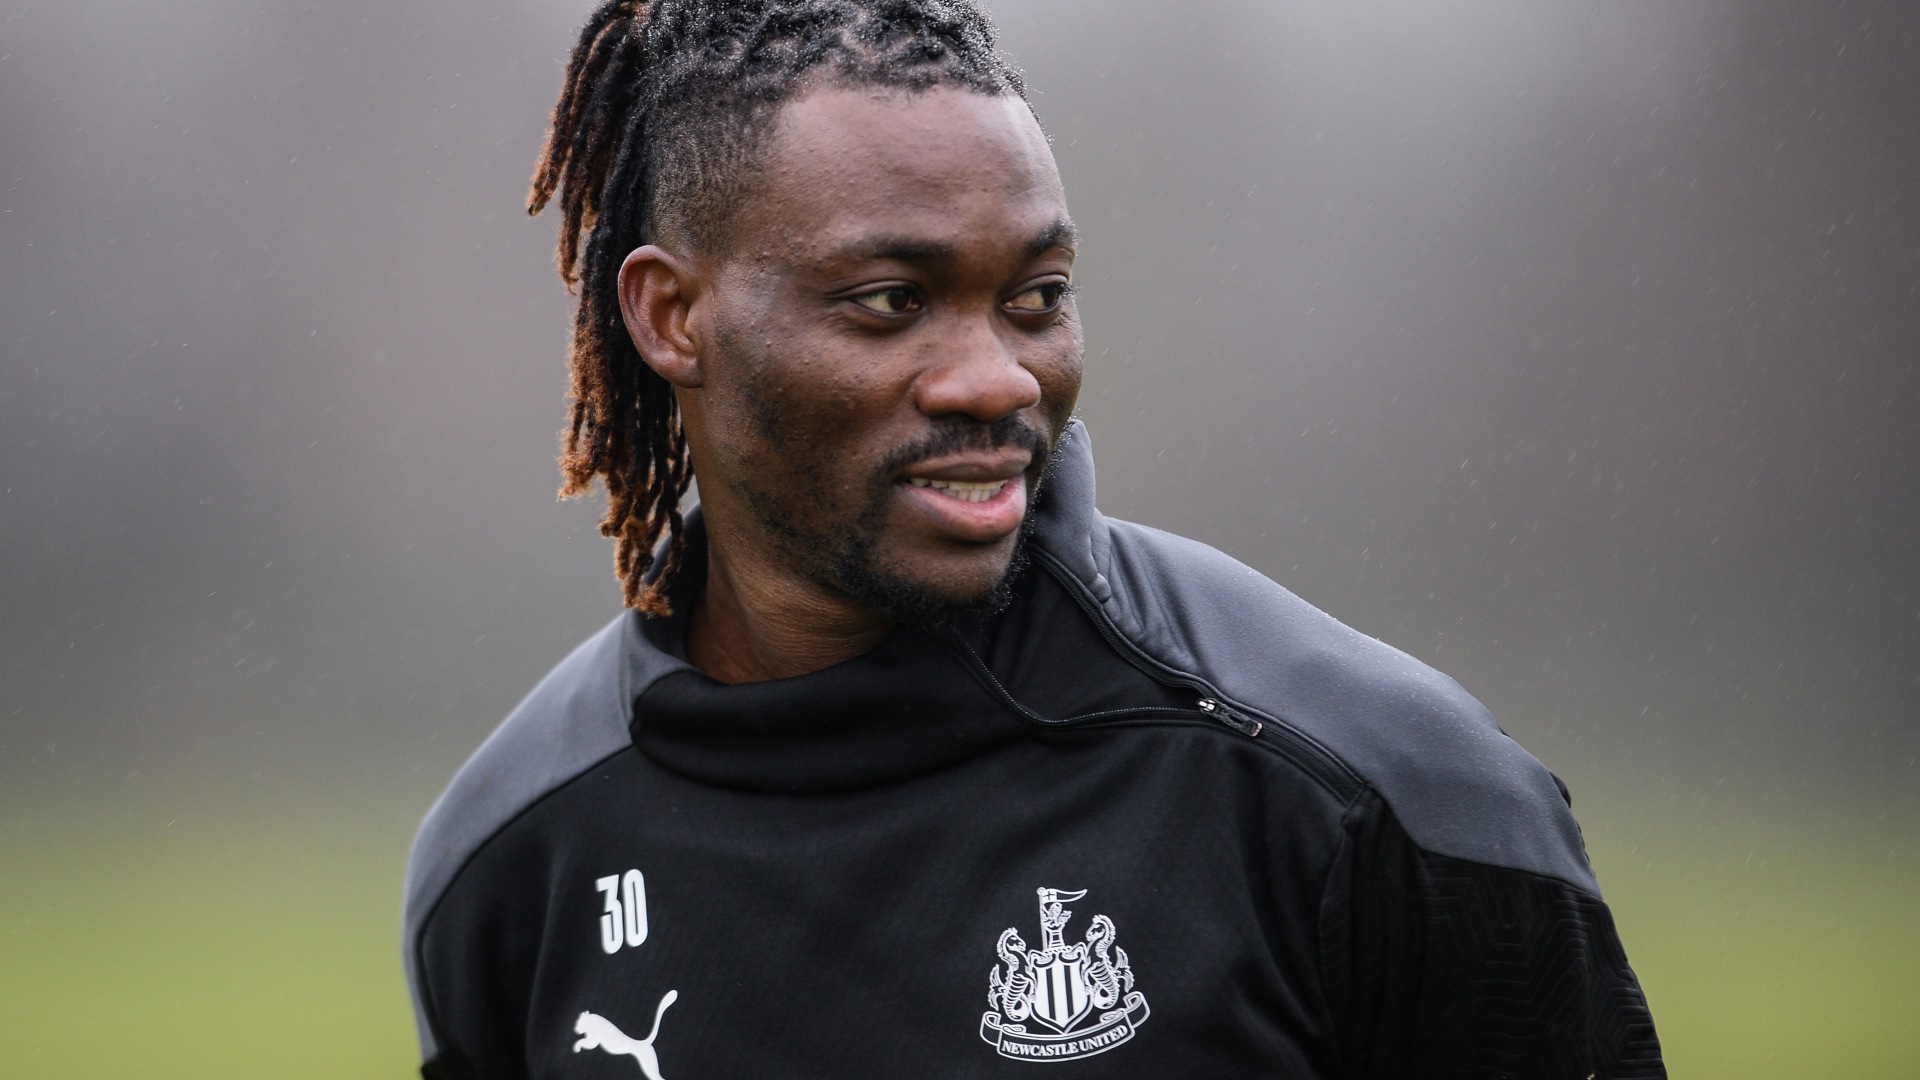 Former Chelsea and Newcastle star Christian Atsu ‘found alive but injured’ after 7.7 magnitude earthquake but no confirmation on Hatayspor winger’s health